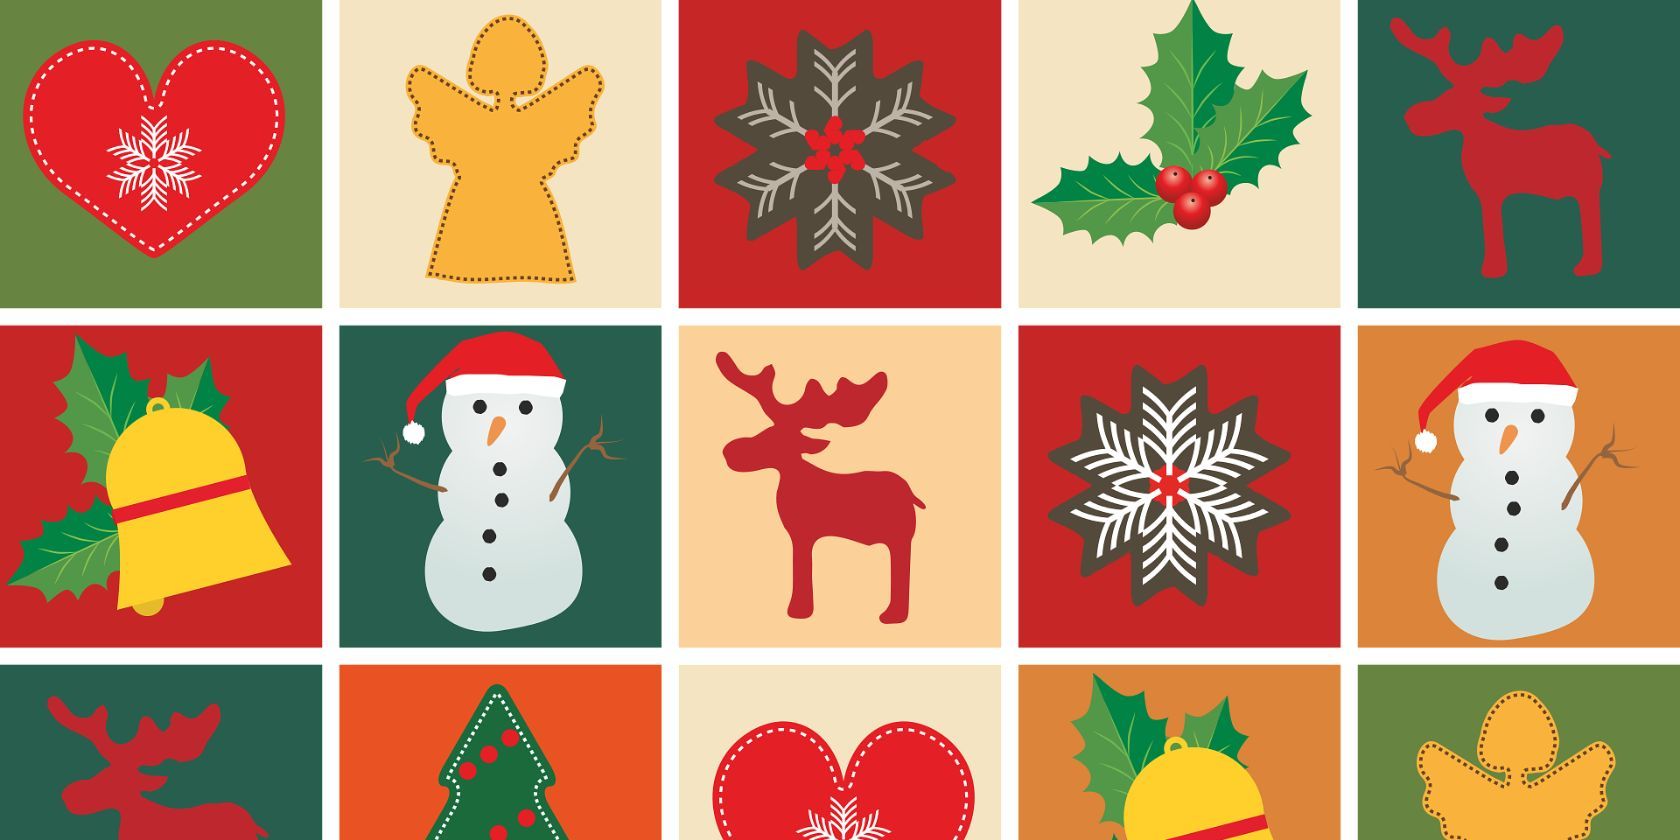 Collage image of Christmas items including snowmen, reindeer, and holly.